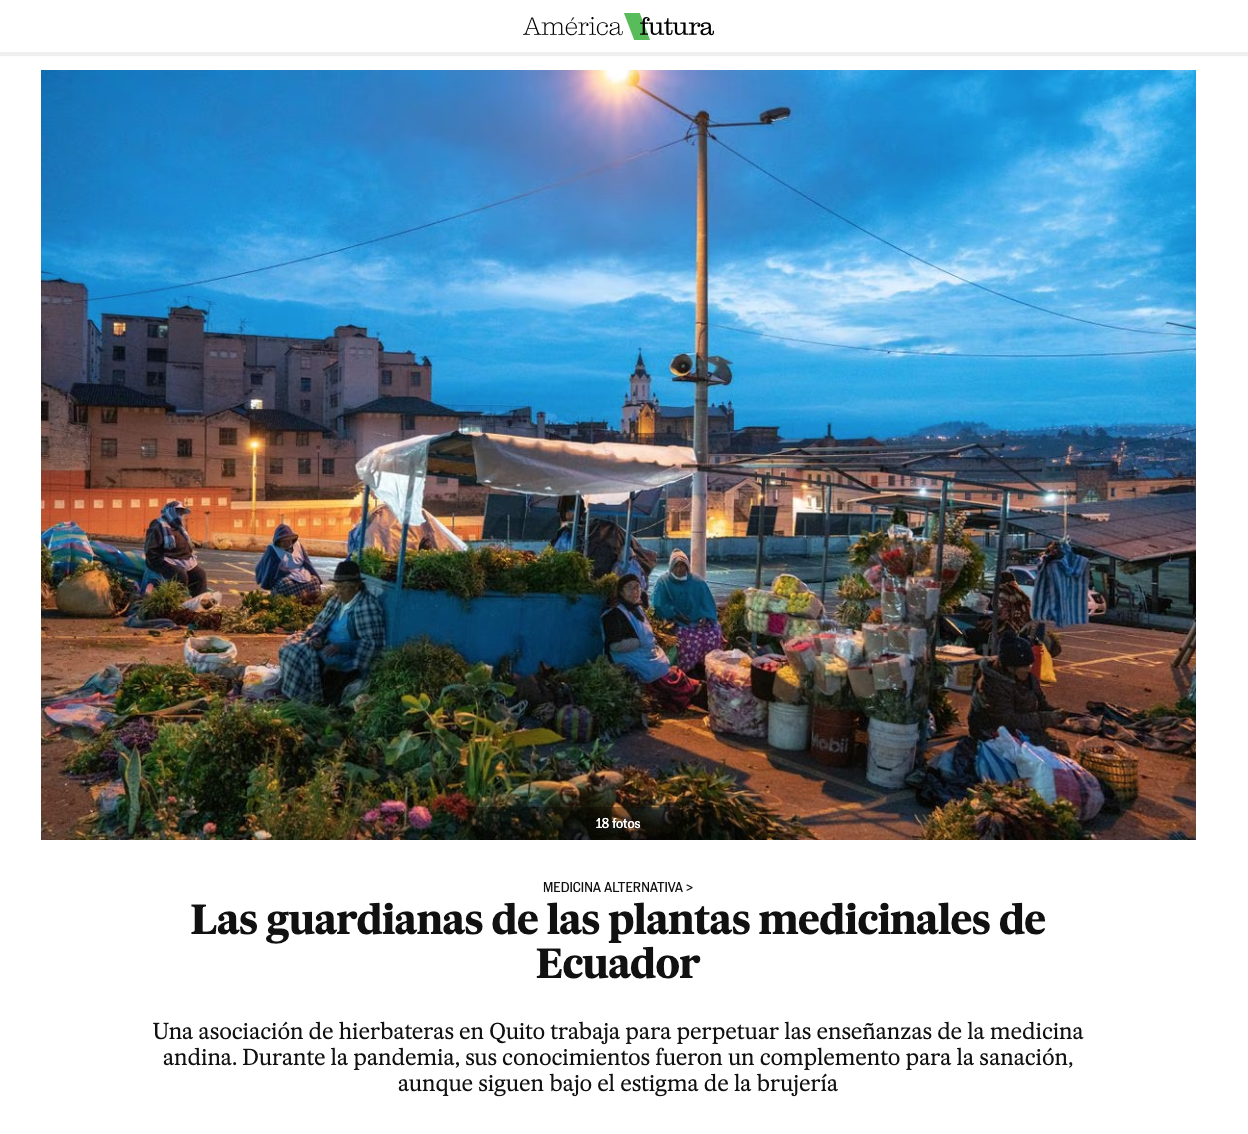 On assignment for El País: The guardians of medicinal plants